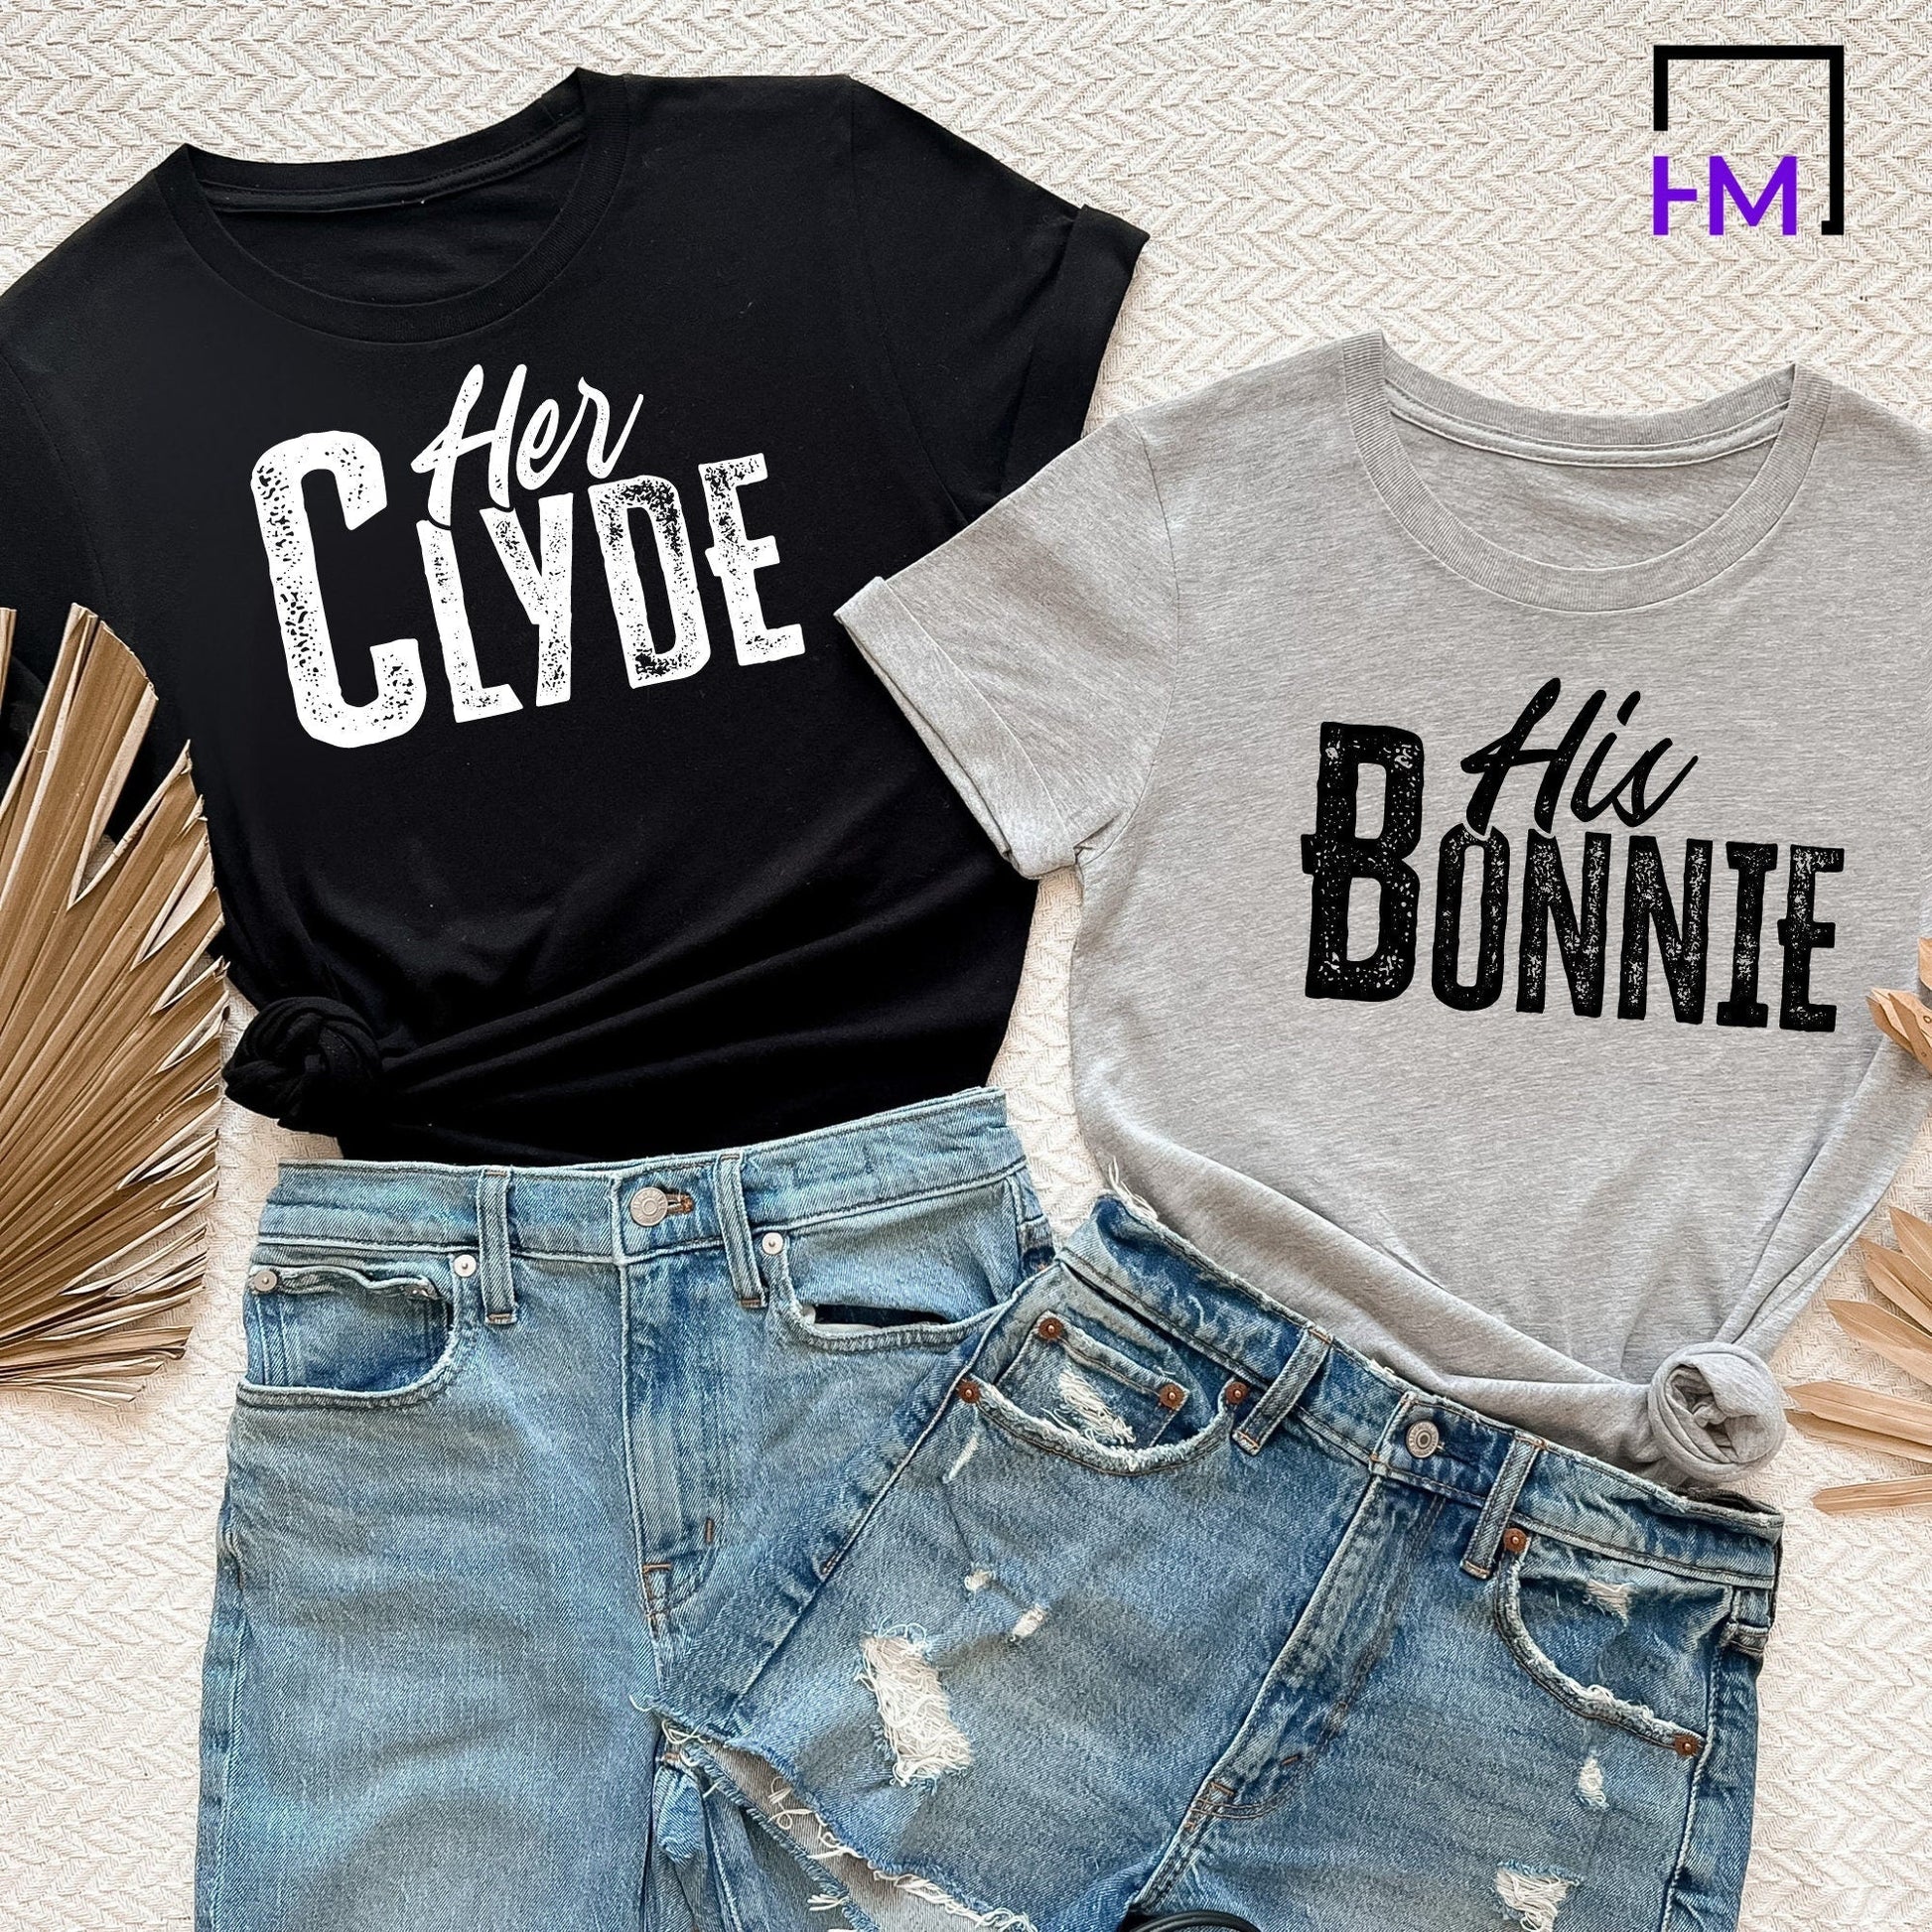 Funny Couples Shirts, Bonnie Clyde Gift for boyfriend, Wife, Husband, Engagement Announcement, Cute Couples Sweater/Hoodie, Wedding Present HMDesignStudioUS